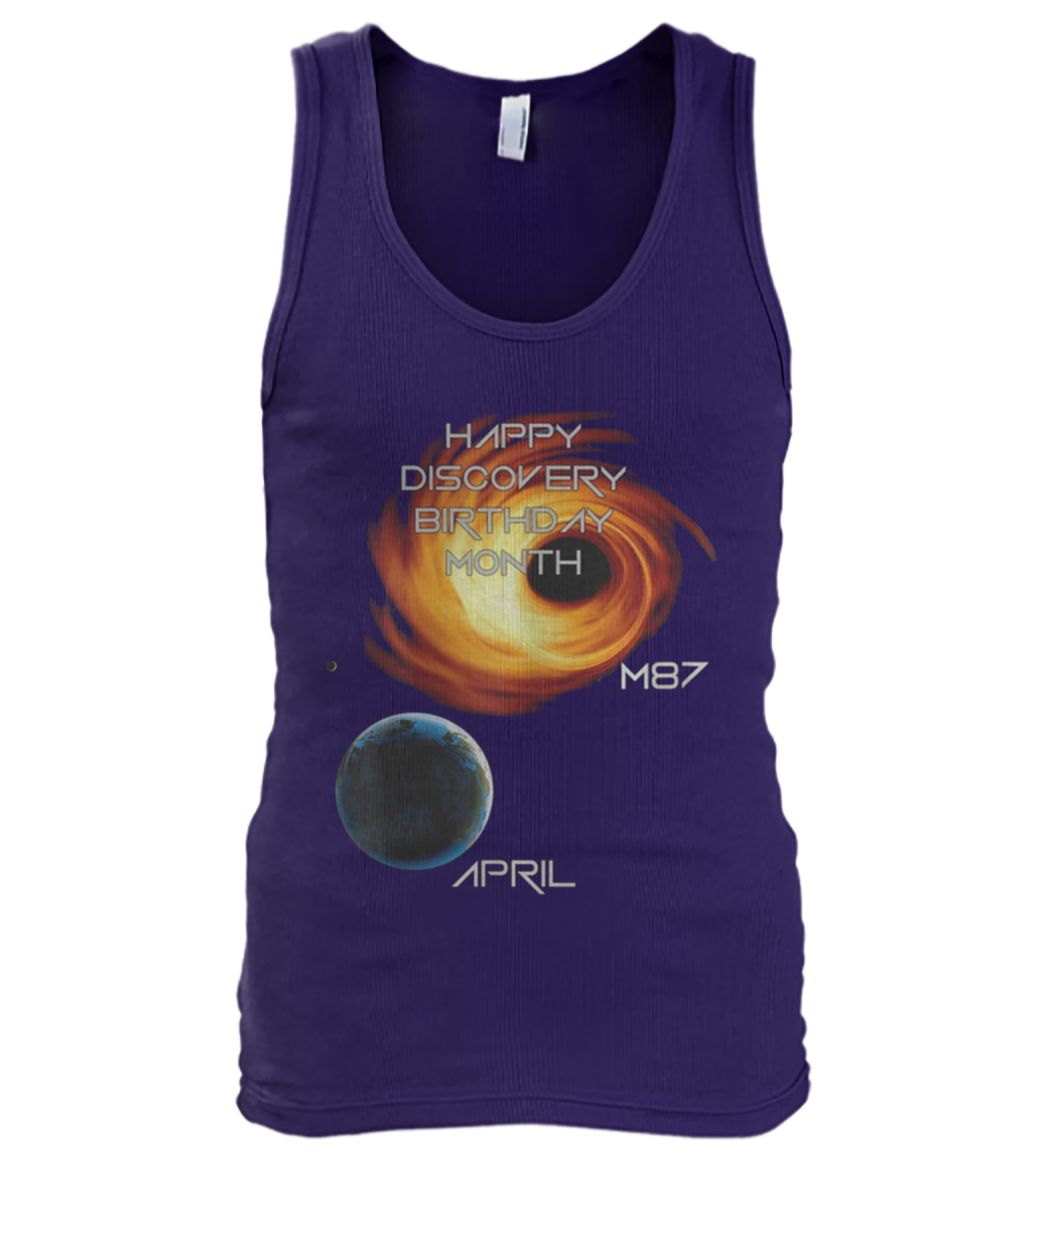 Happy discovery birthday month first picture of a black hole m87 galaxy april 10 men's tank top